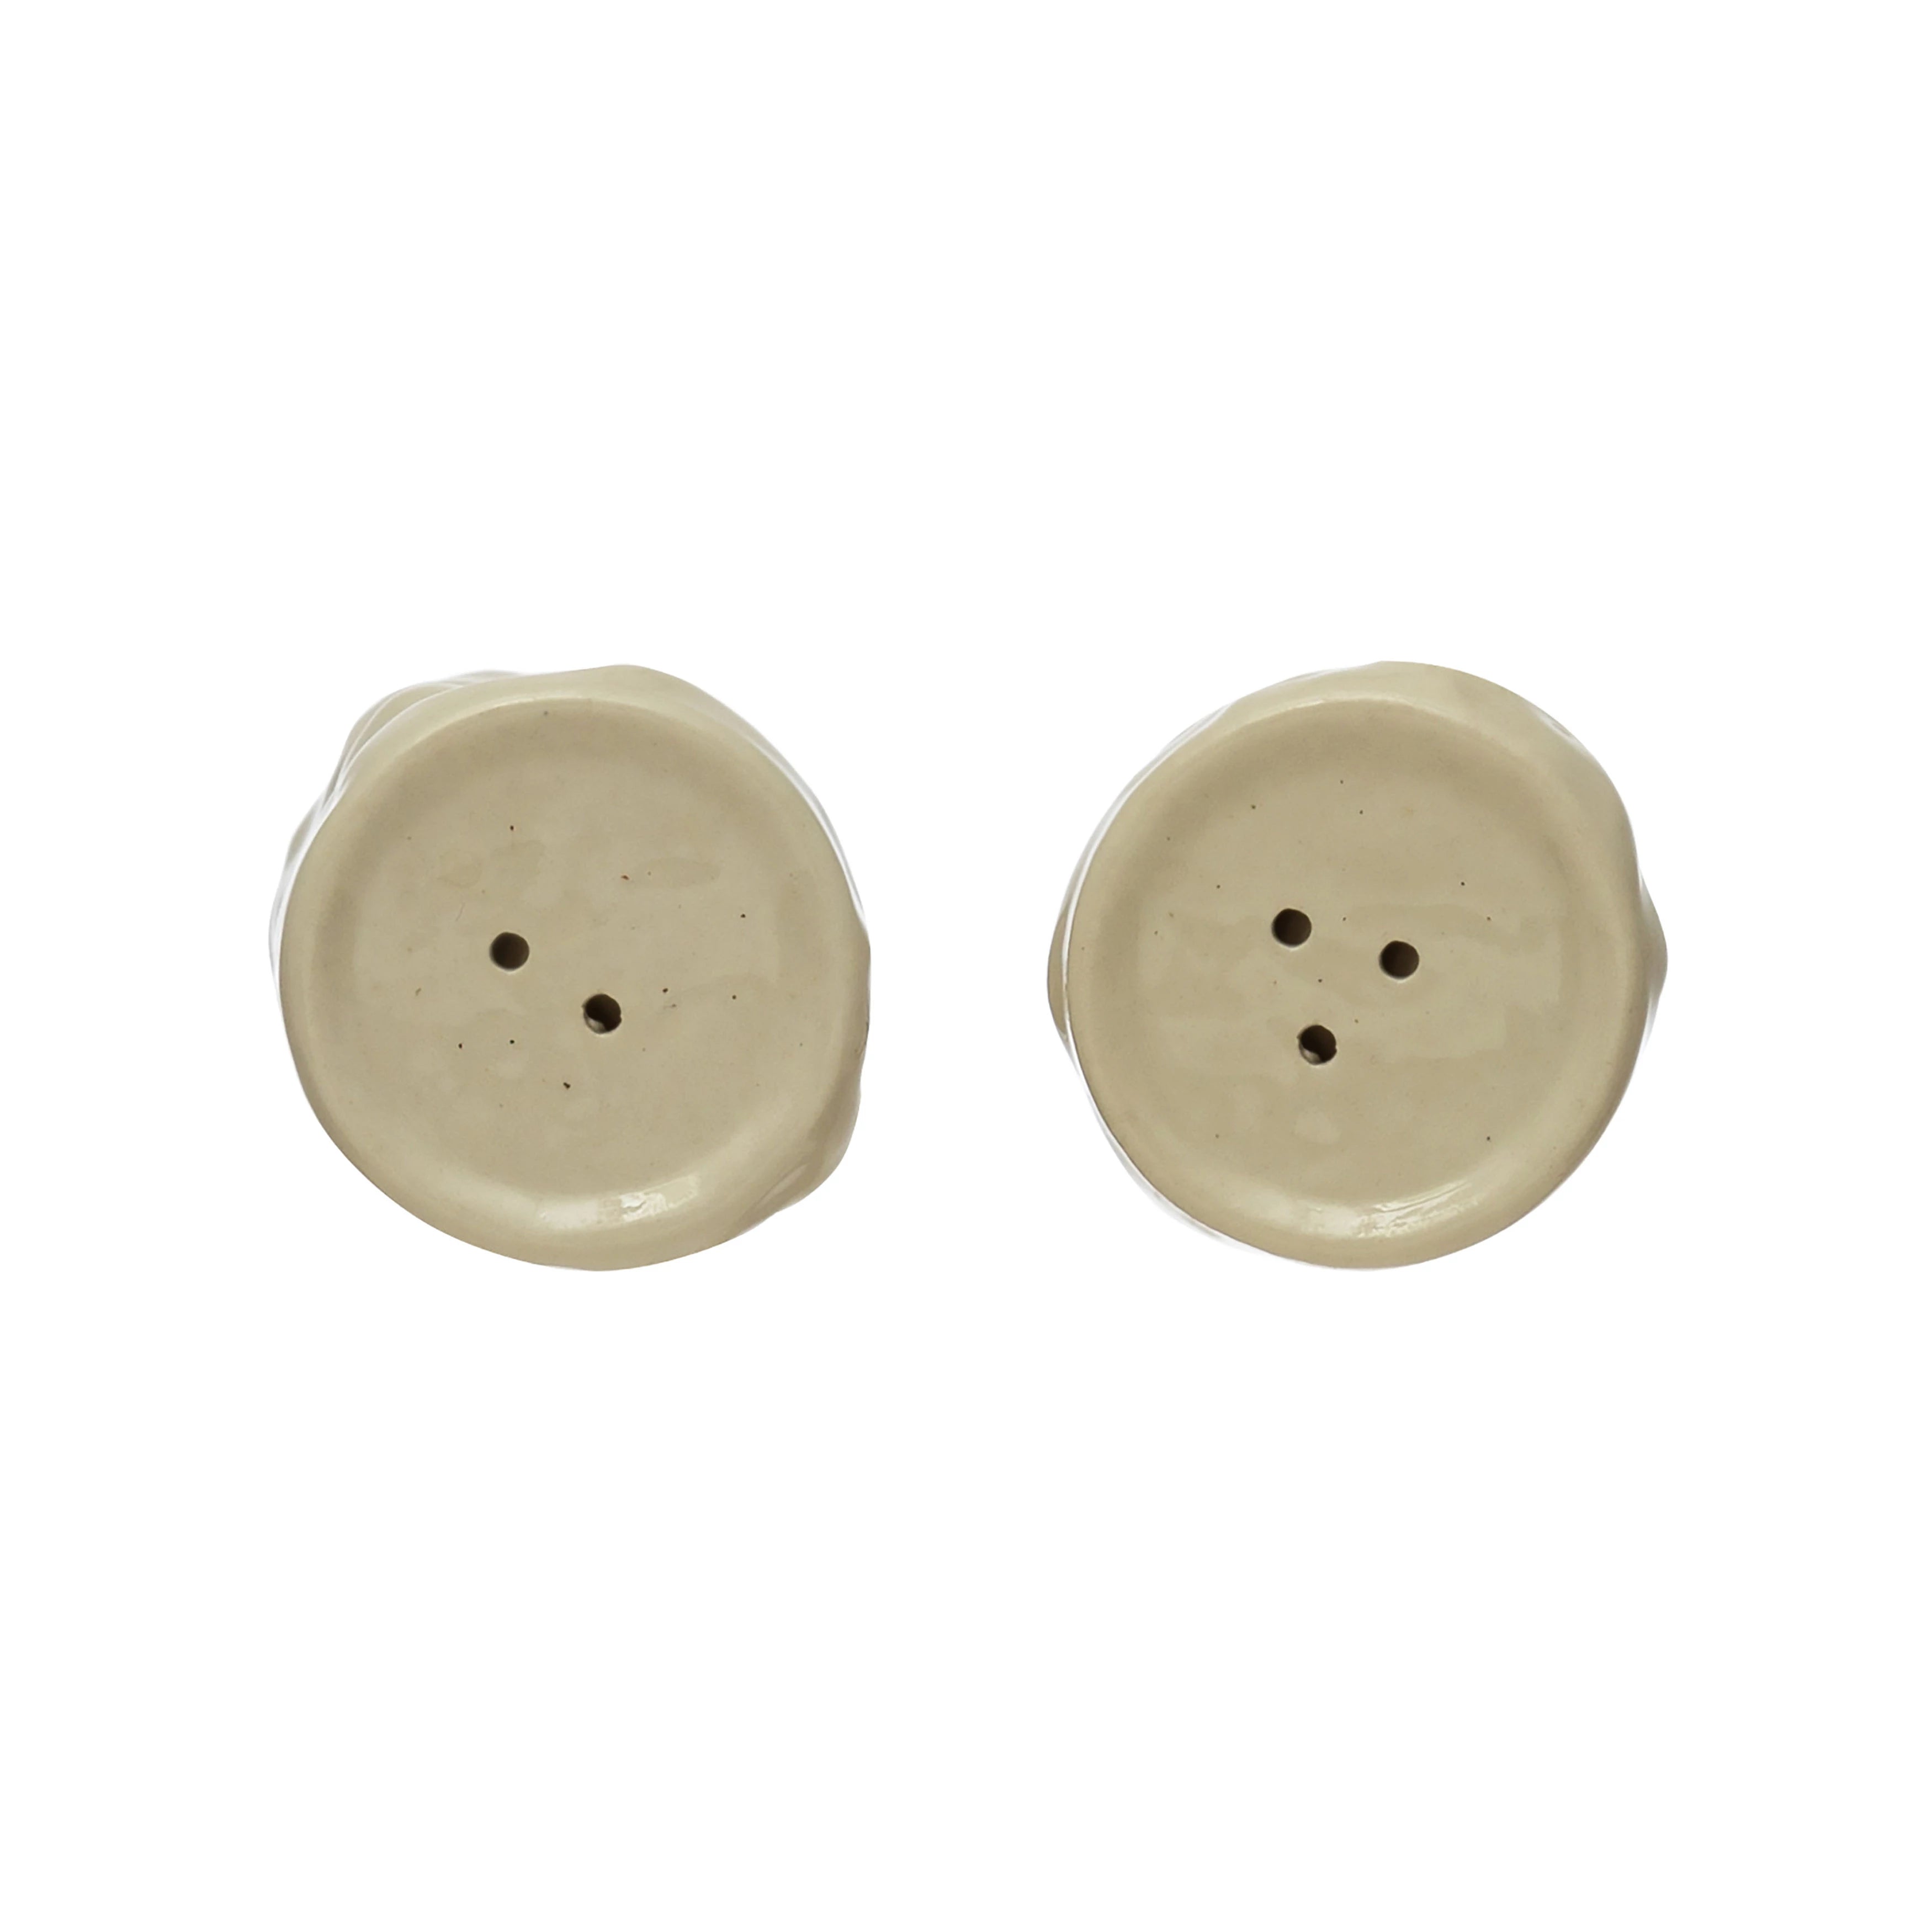 Sculpted Stoneware Salt and Pepper Shakers, Set of 2